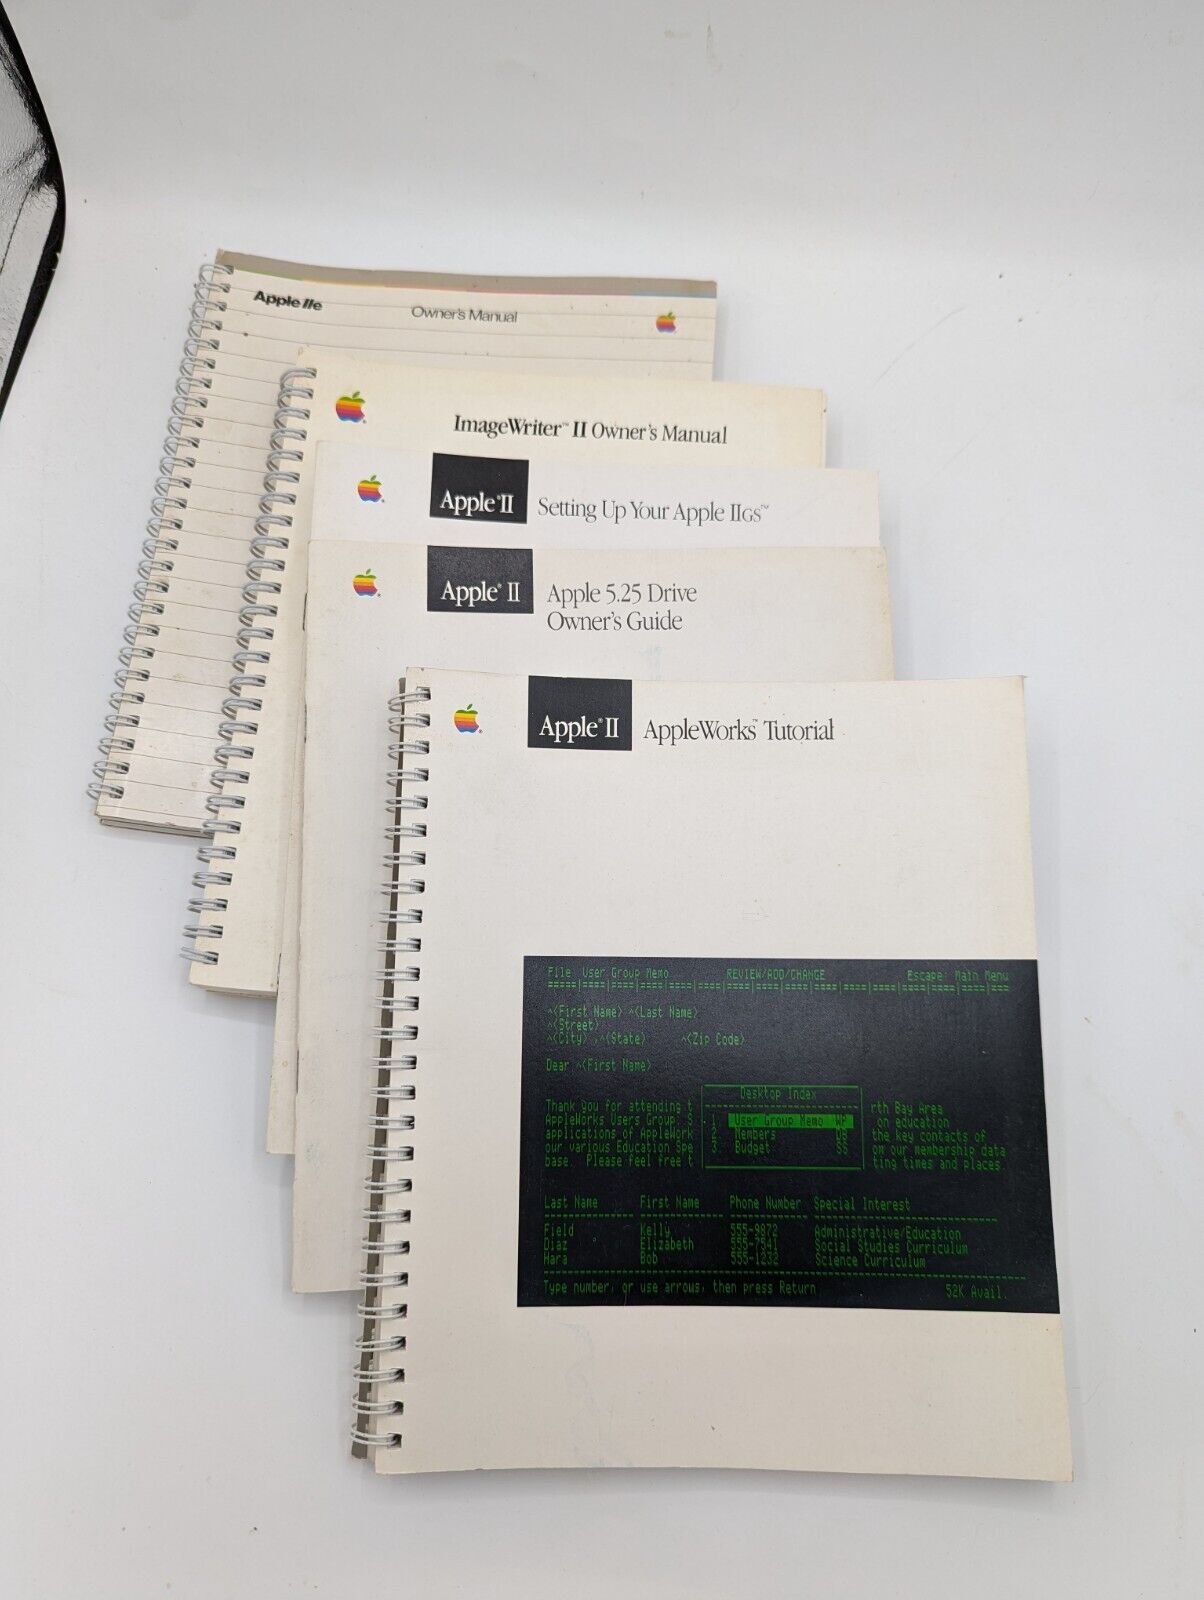 Lot (5) of Apple II (2) Macintosh User Owners Guides and Tutorials